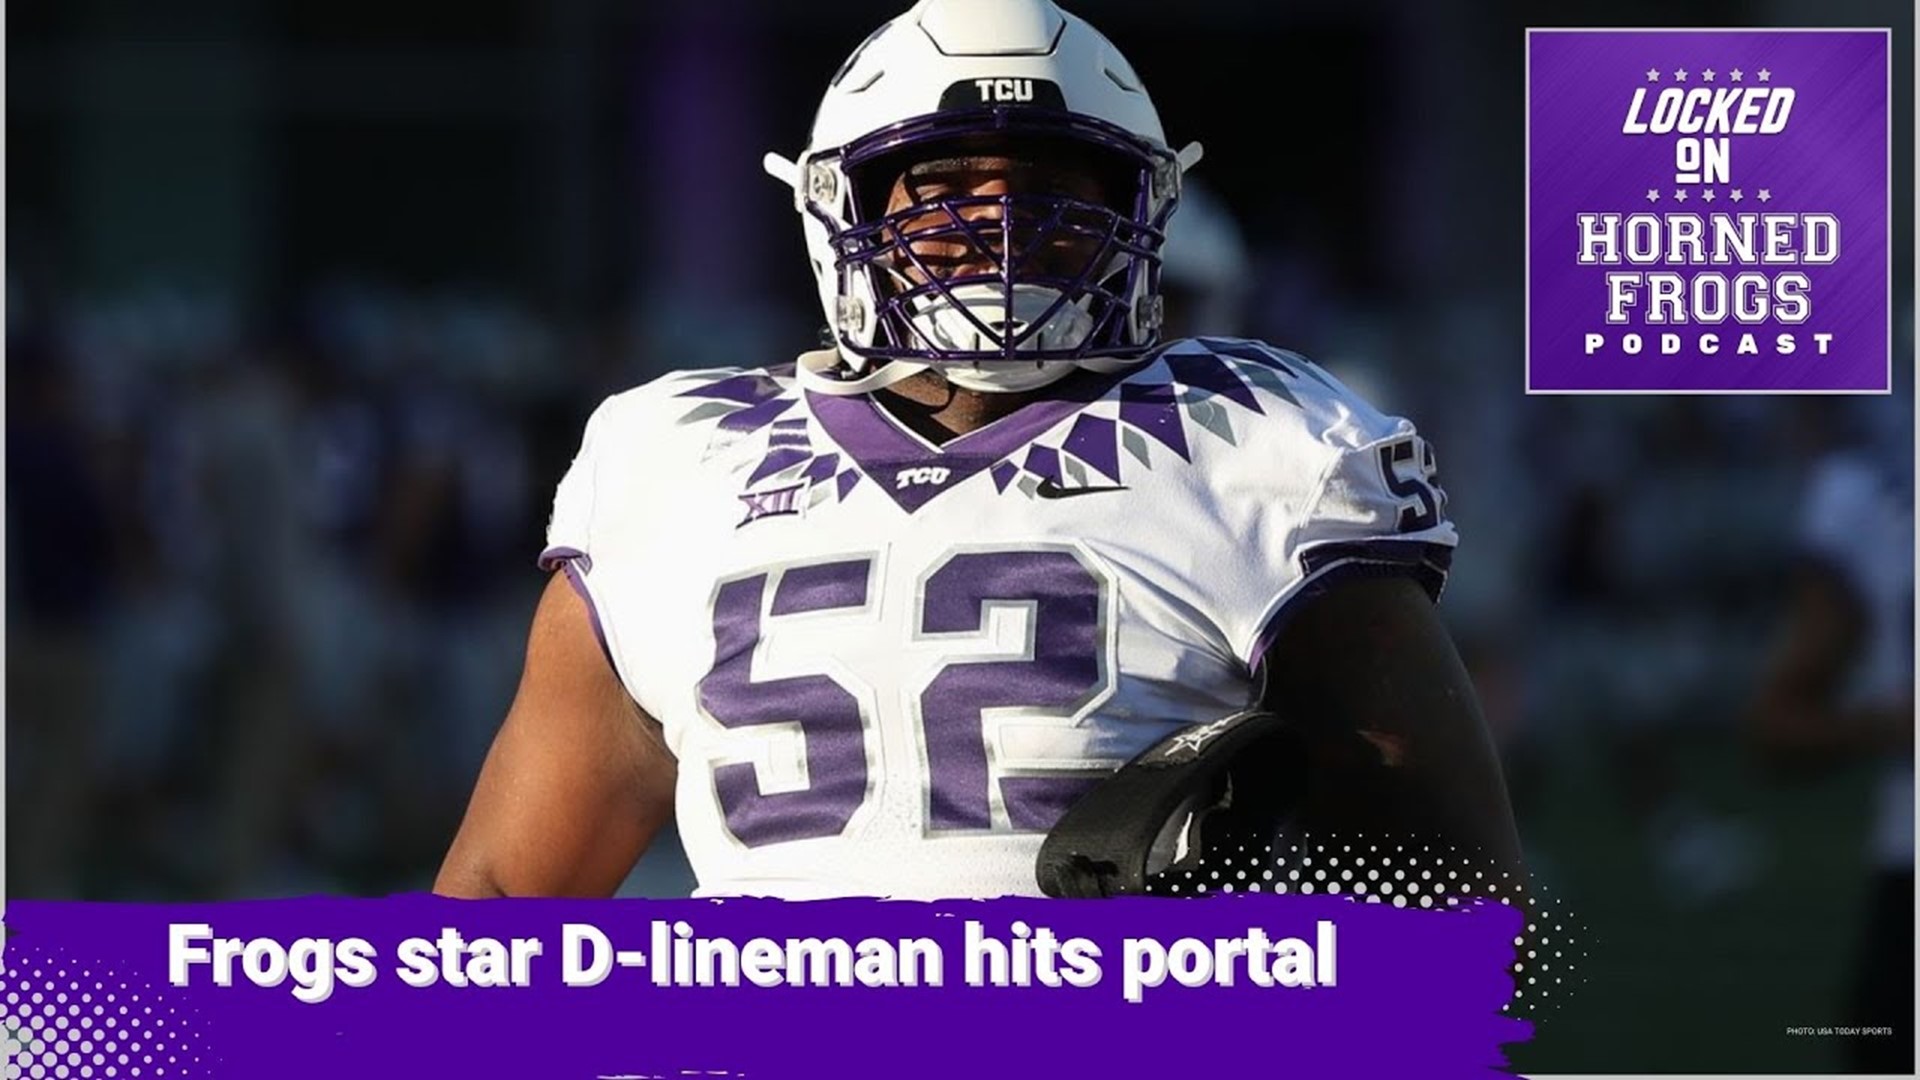 Frogs star D-lineman Damonic Williams is set to enter the transfer portal. Where do the Frogs go from here?